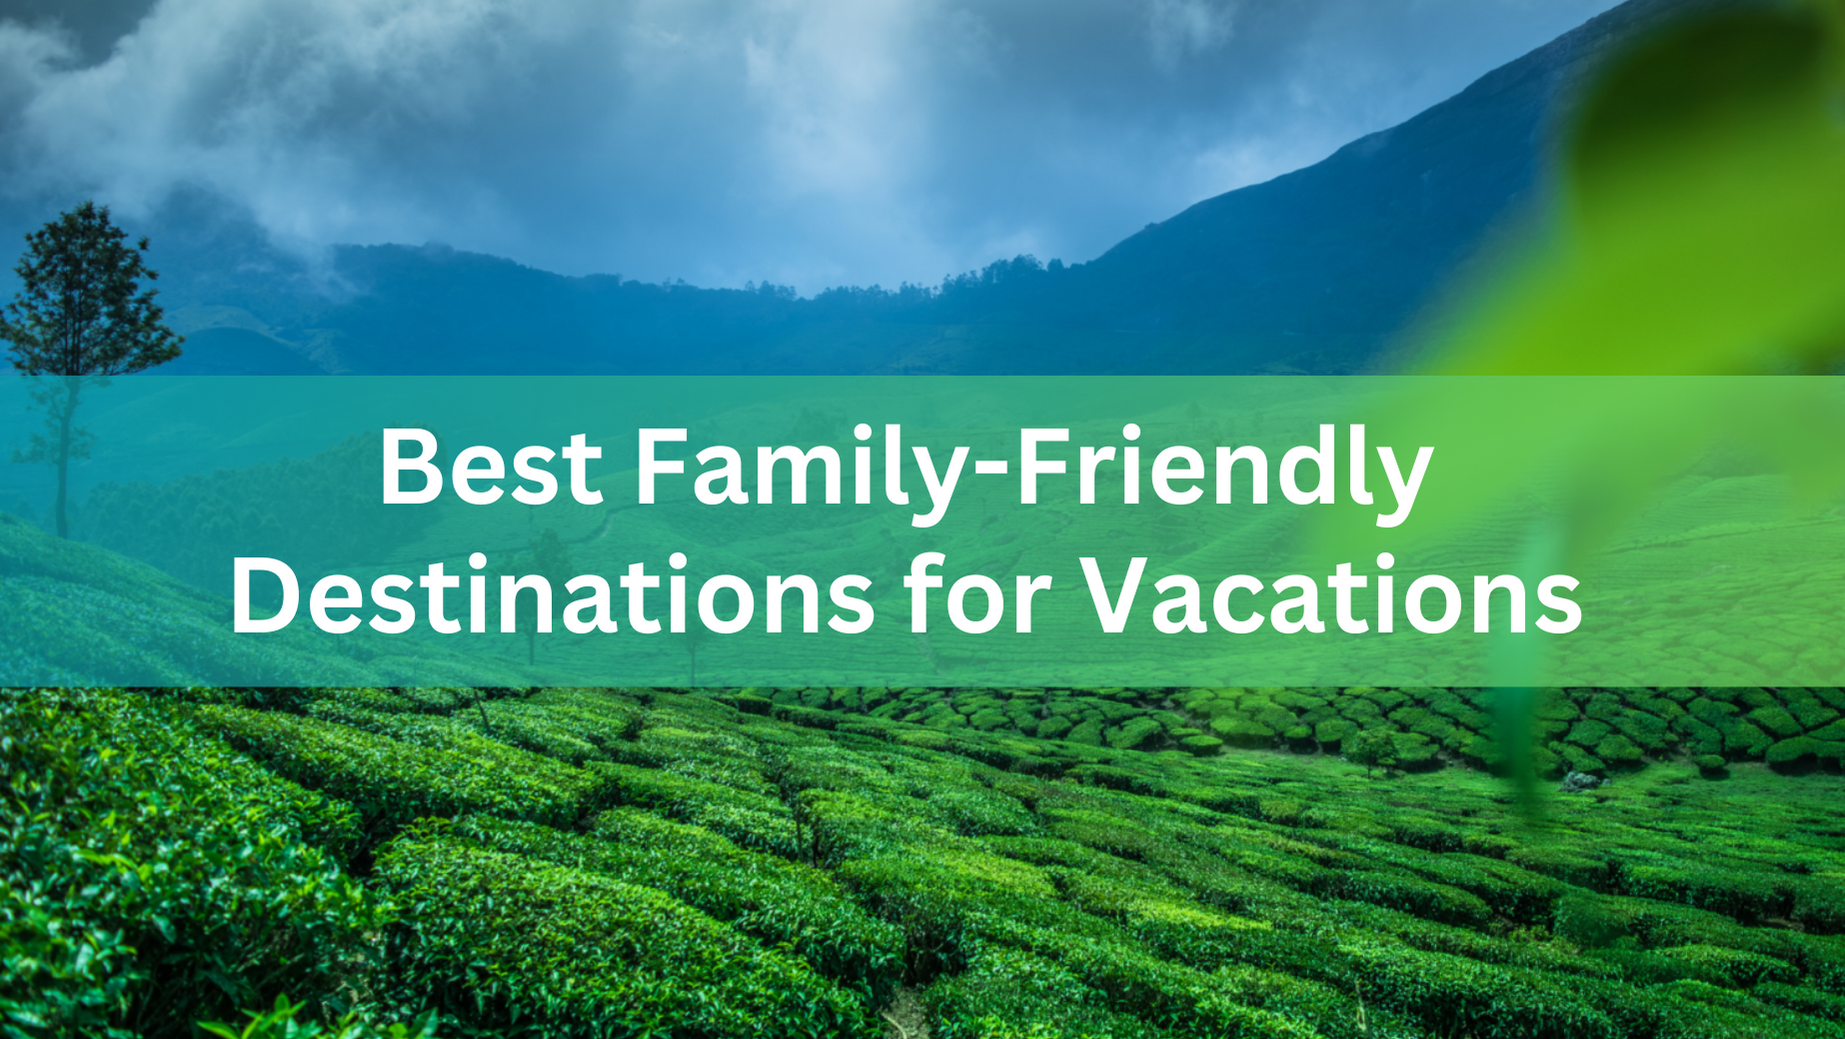 What are the Best Family-Friendly Destinations for Vacations?